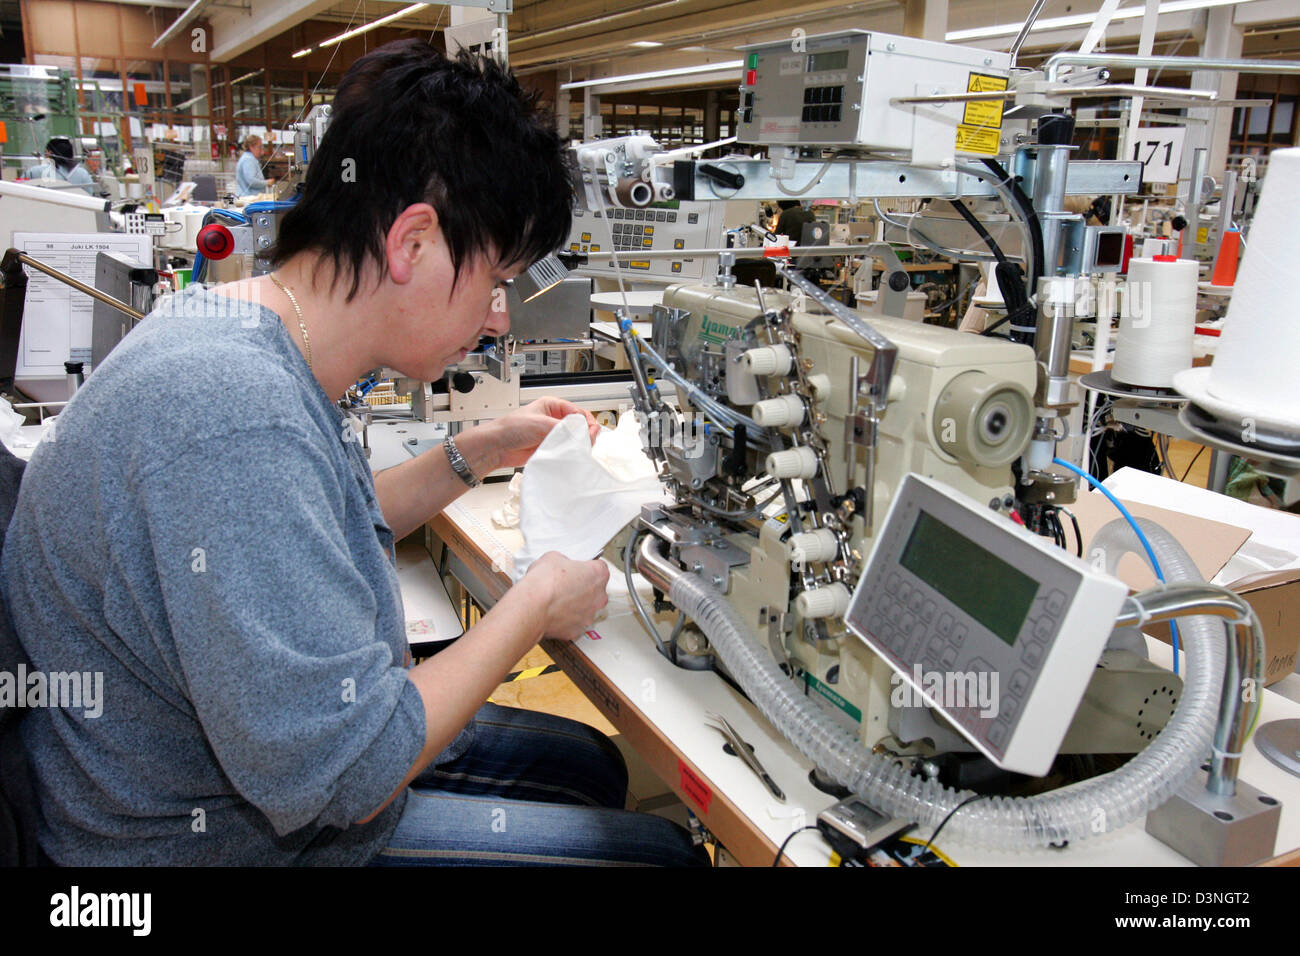 An employee of 'mey bodywear' sews together pieces of fabric for